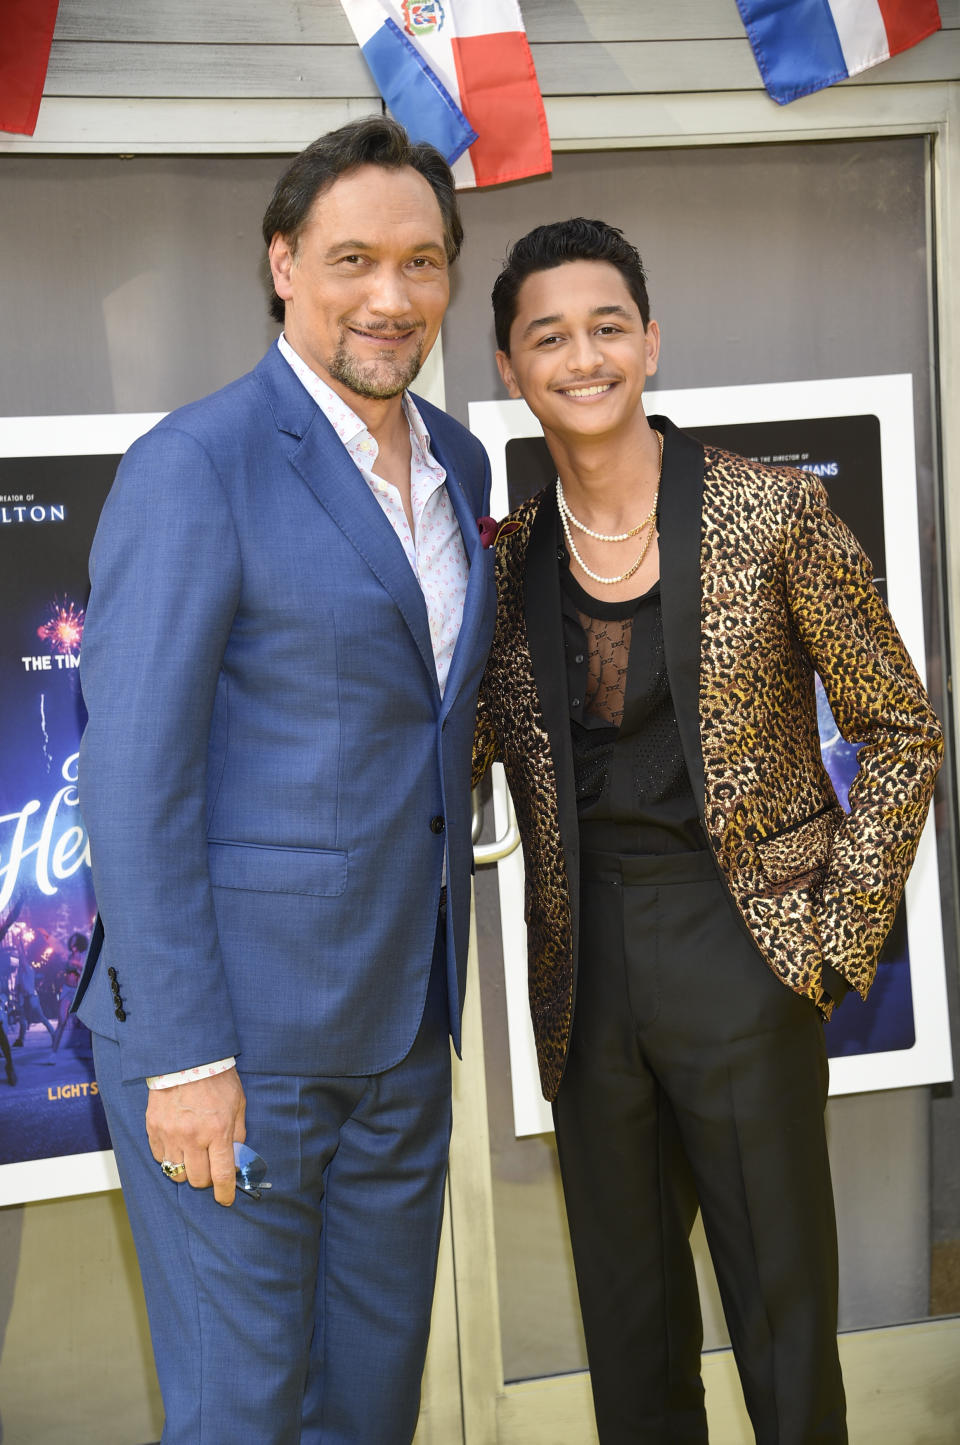 Actors Jimmy Smits, left, and Gregory Diaz IV attend the 2021 Tribeca Film Festival opening night premiere of "In The Heights" at the United Palace theater on Wednesday, June 9, 2021, in New York. (Photo by Evan Agostini/Invision/AP)